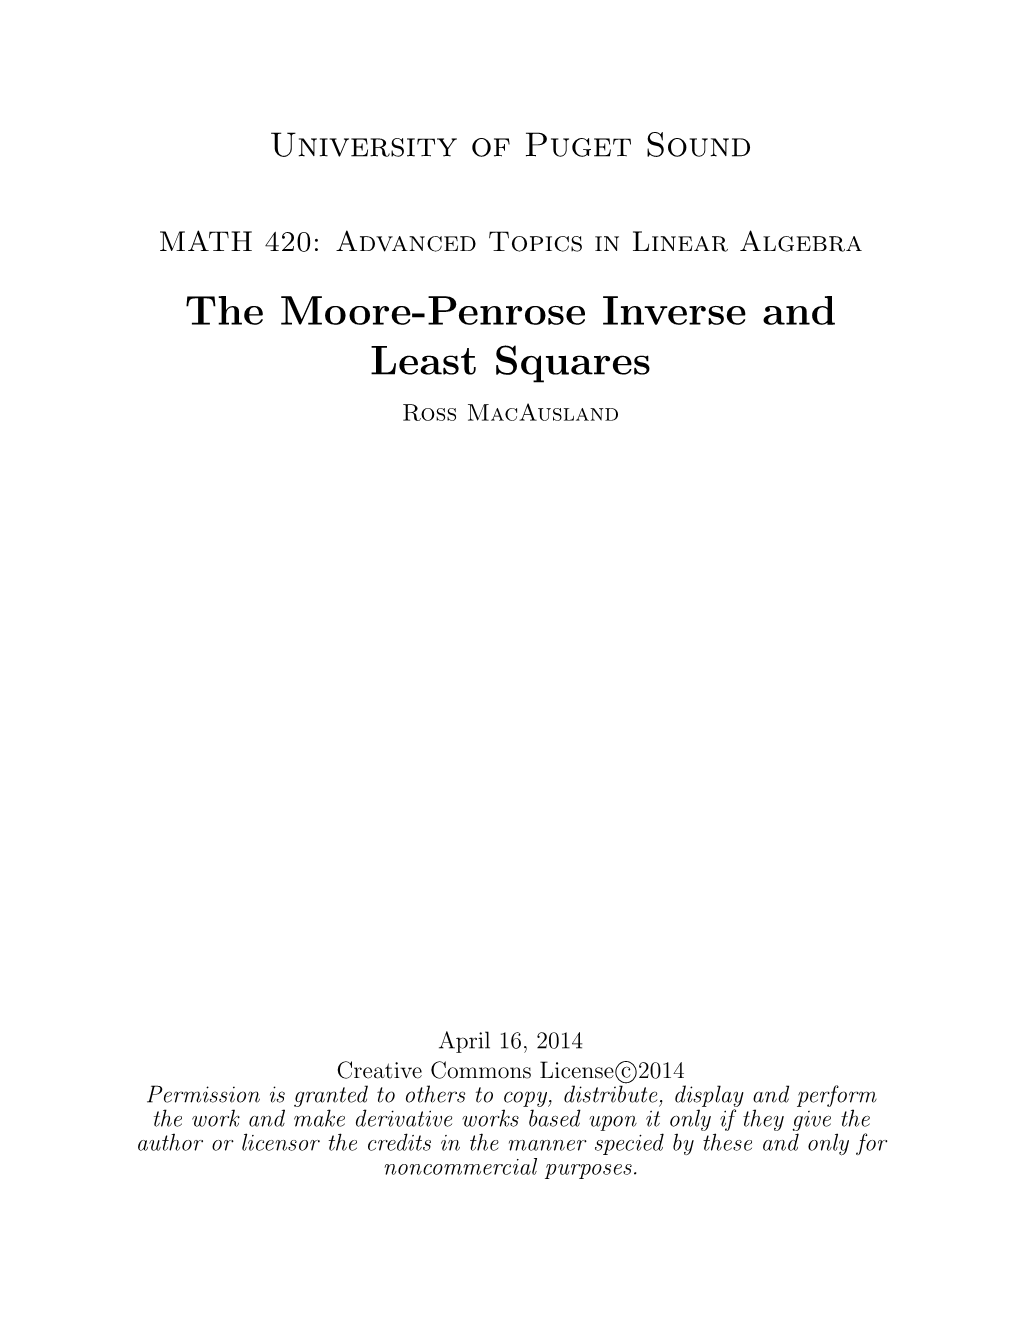 The Moore-Penrose Inverse and Least Squares Ross Macausland